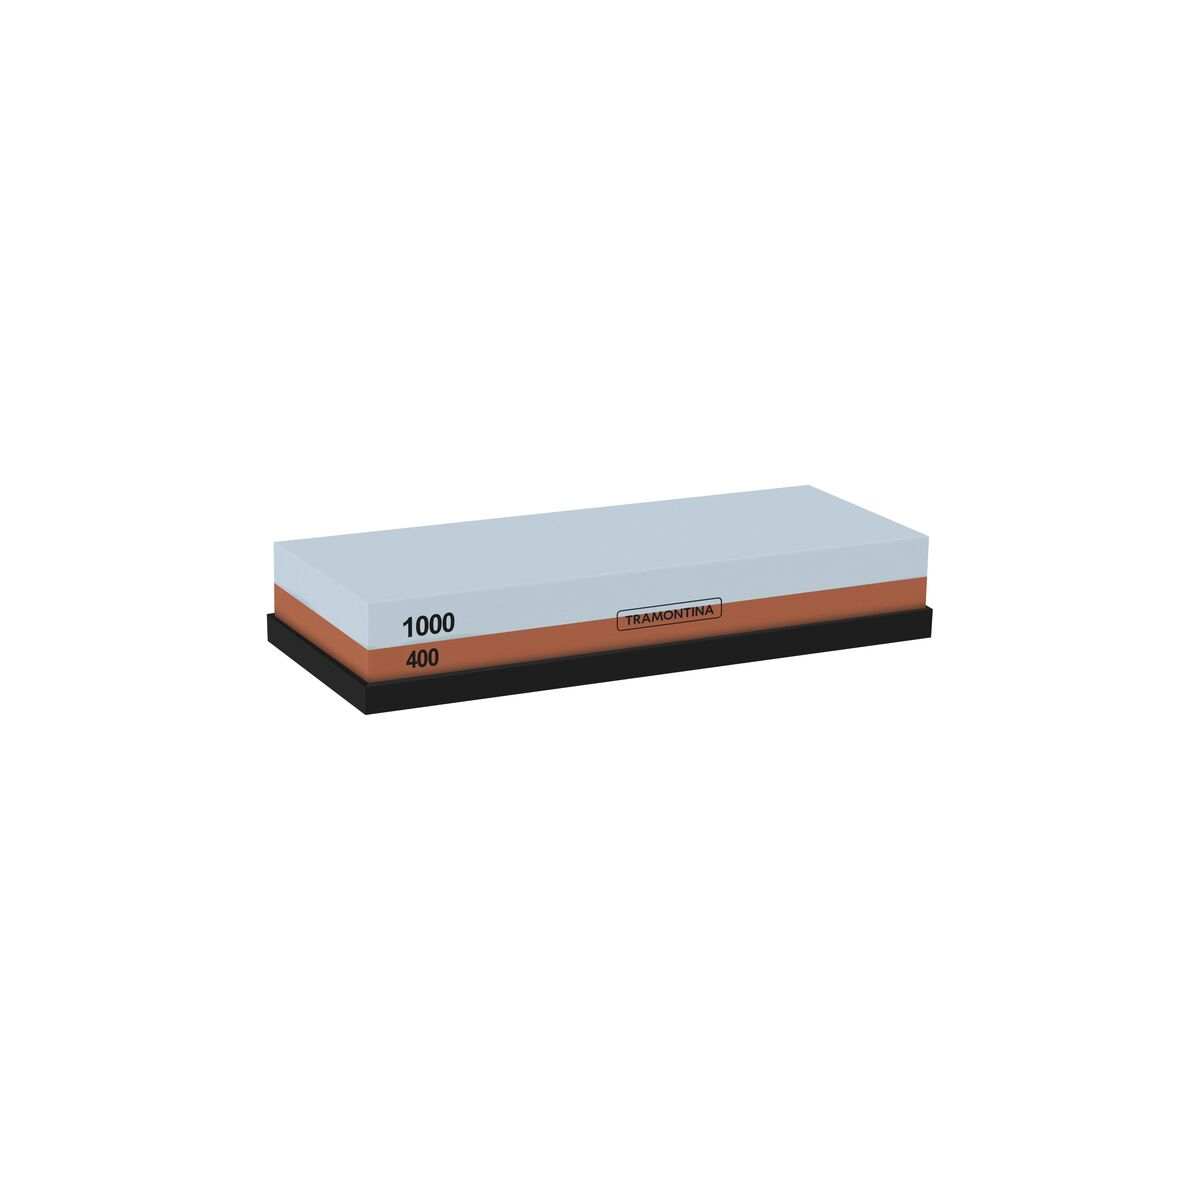 Tramontina Profio Sharpening Stone Double-Sided with Granulation 1000 and 400 and Rubber Support